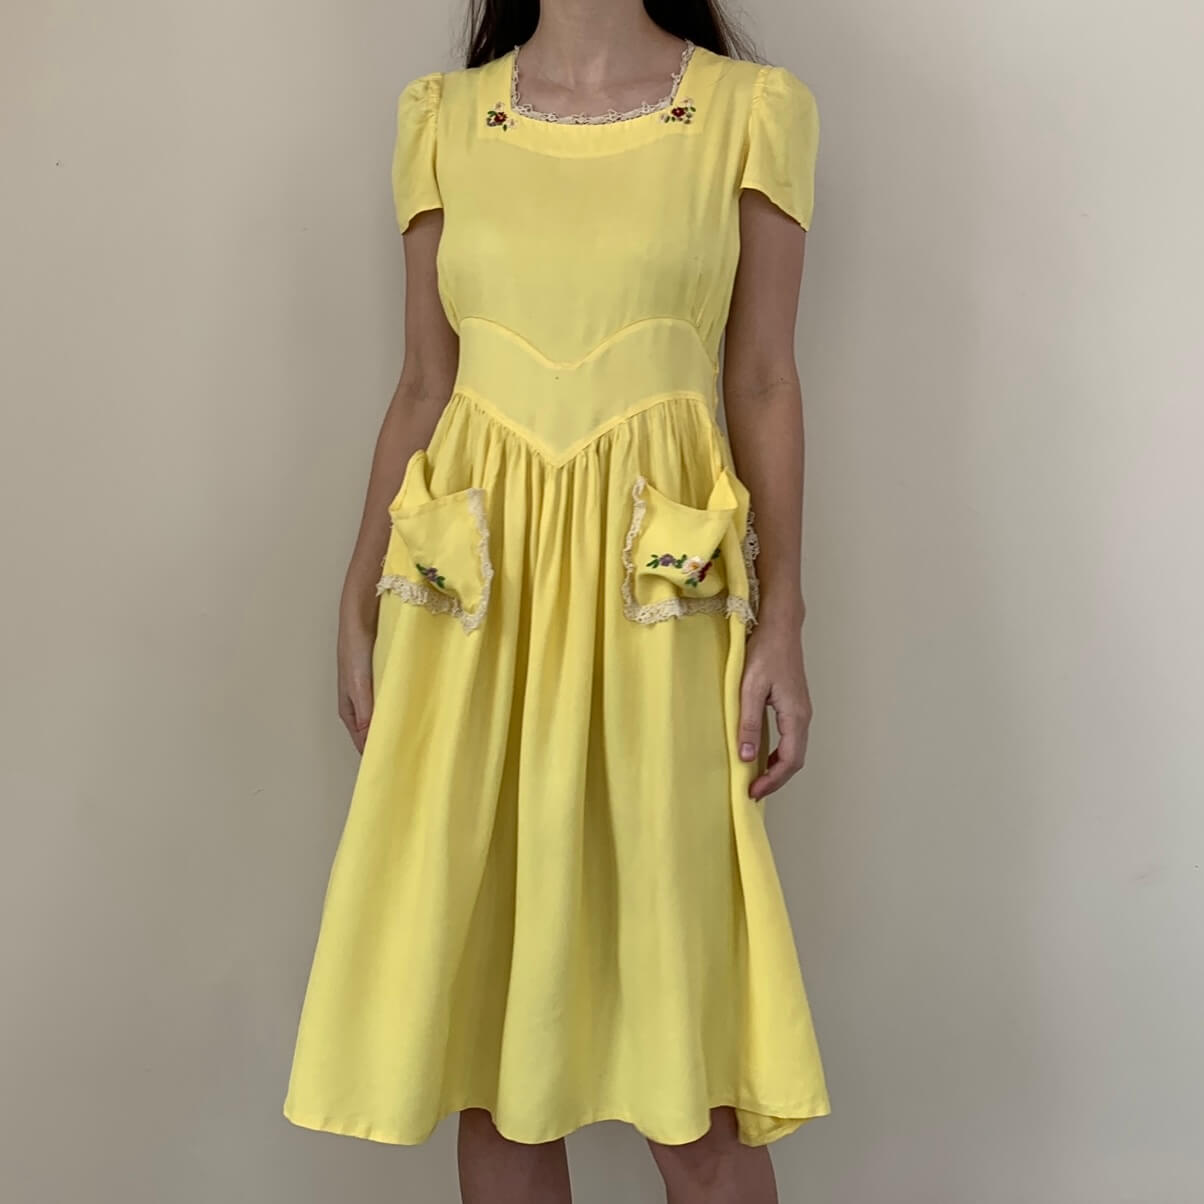 vintage 1930s yellow dress with embroidered flowers and patch pockets